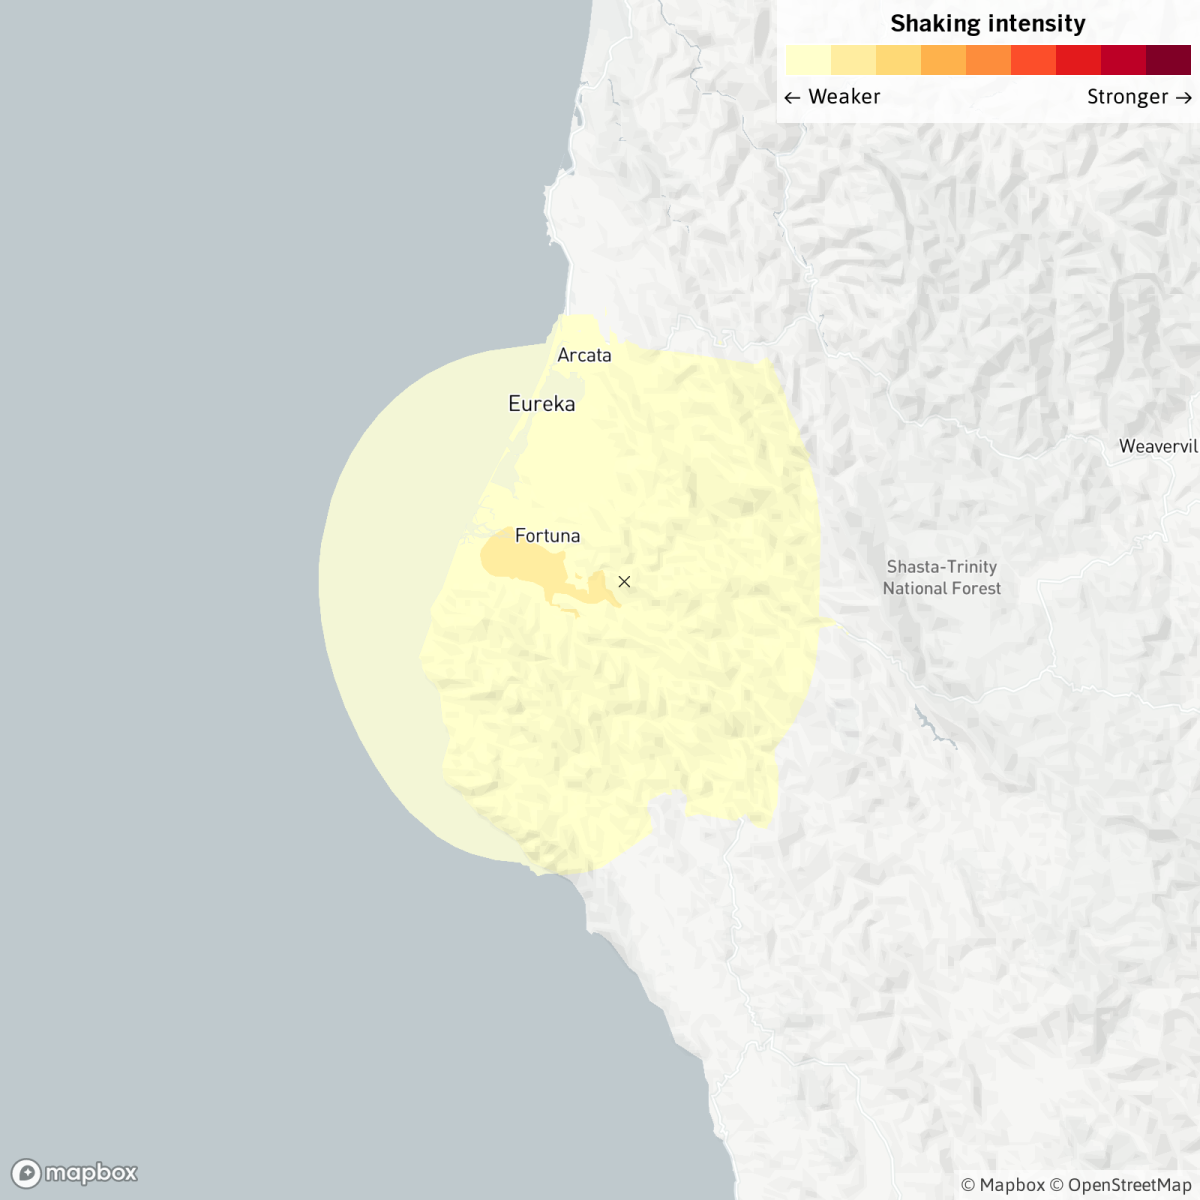 Locator map showing the epicenter and shake area of the quake near the coast.